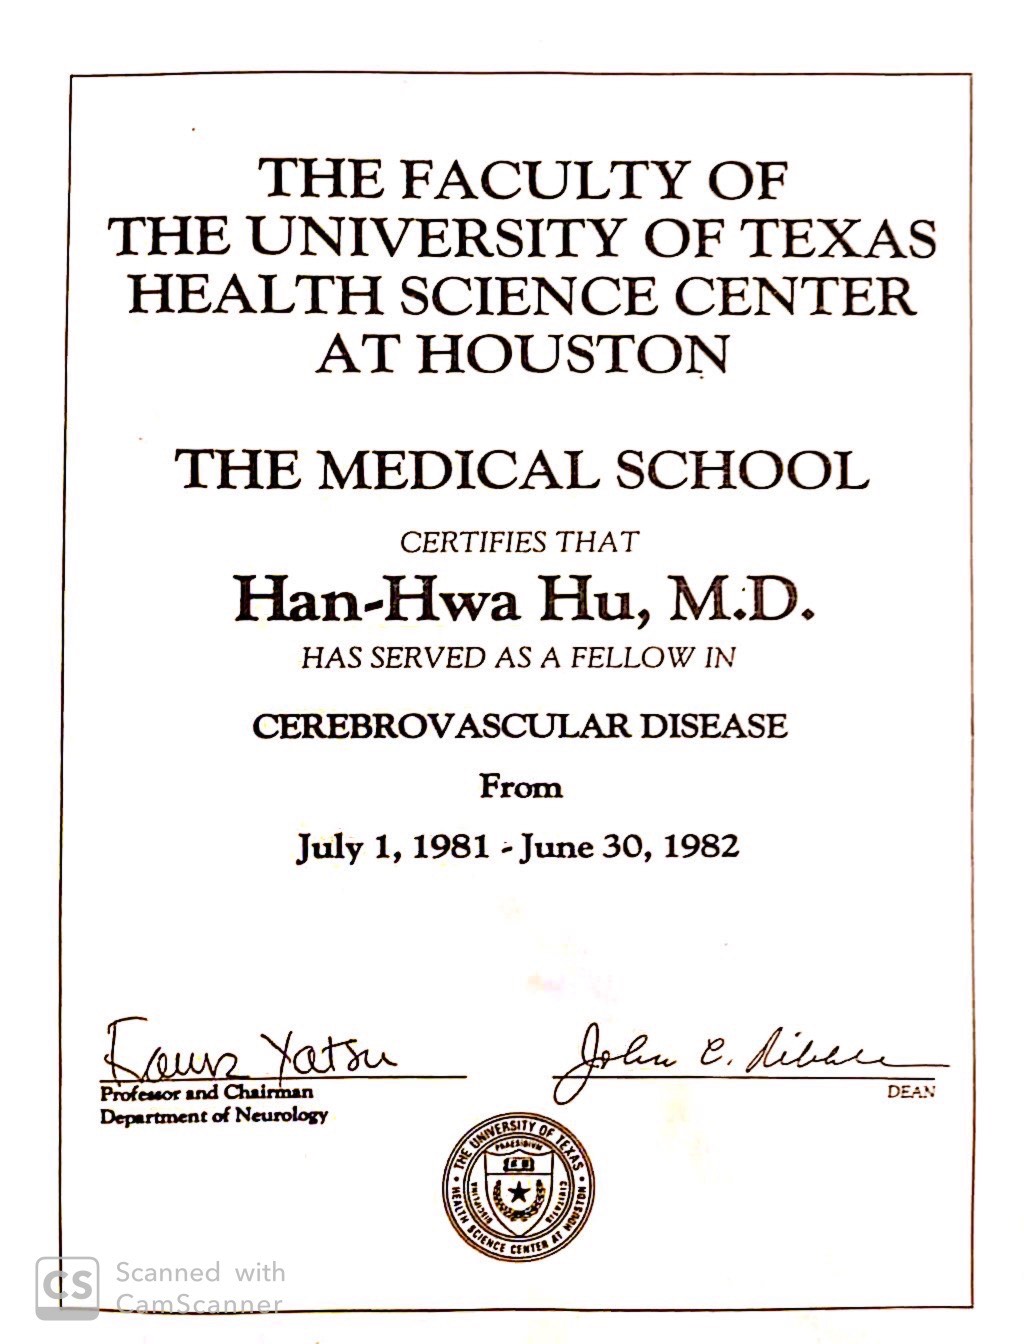 Image shows Hun-Hwa Hu UTHealth Houston Certificate of Completion reading The Faculty of The University of Texas Health Science Center at Houston, The Medical School certifies that Han-Hwa Hu, MD has served as a Fellow in Cerebrovascular Disease from July 1, 1981 to June 30, 1982